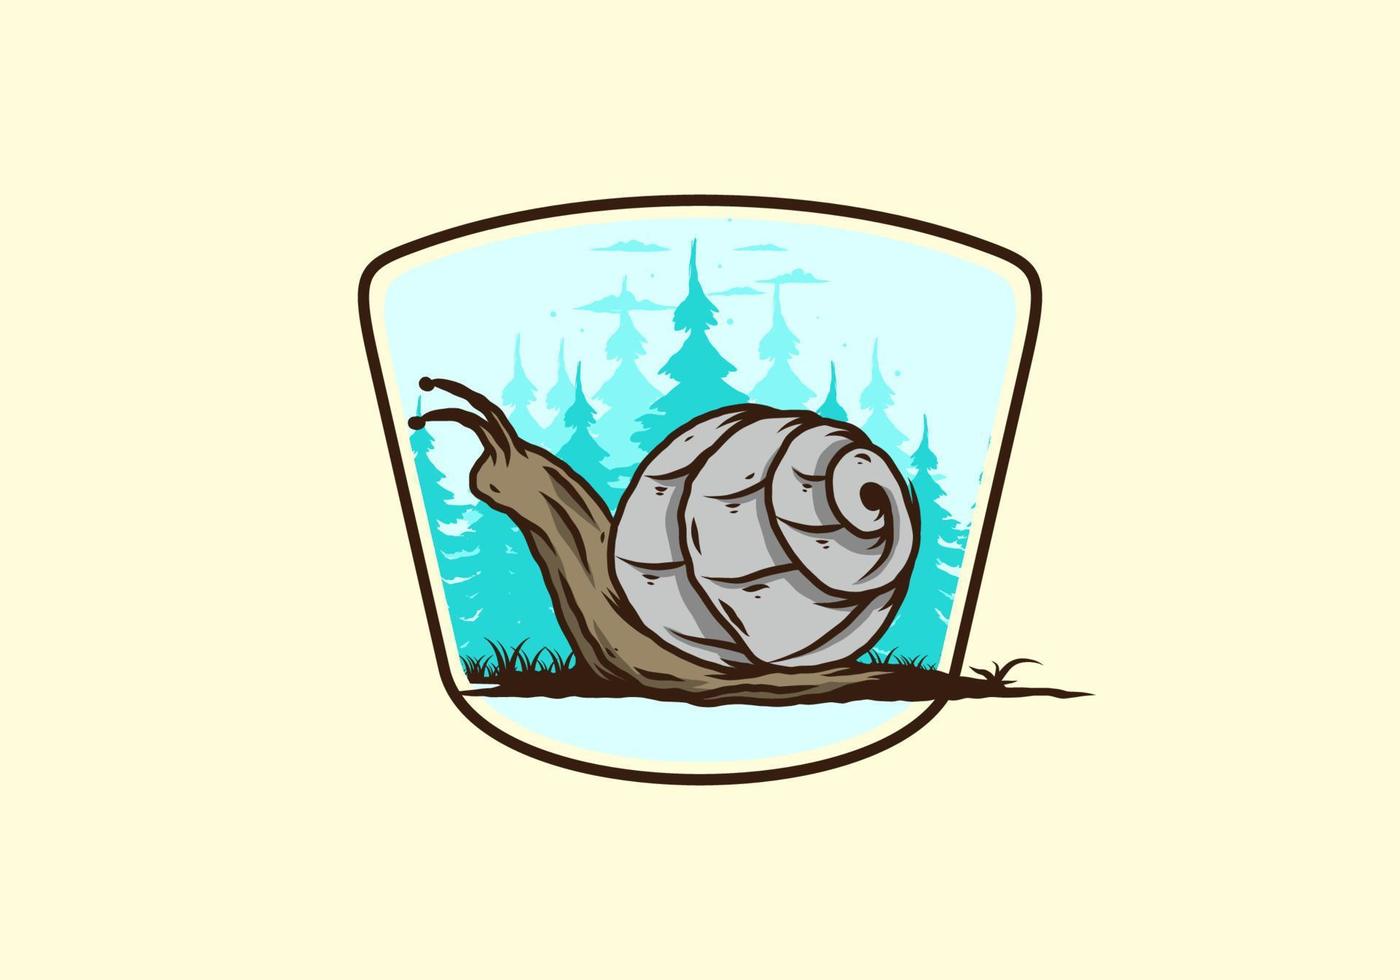 Snail creeping in the forest illustration vector